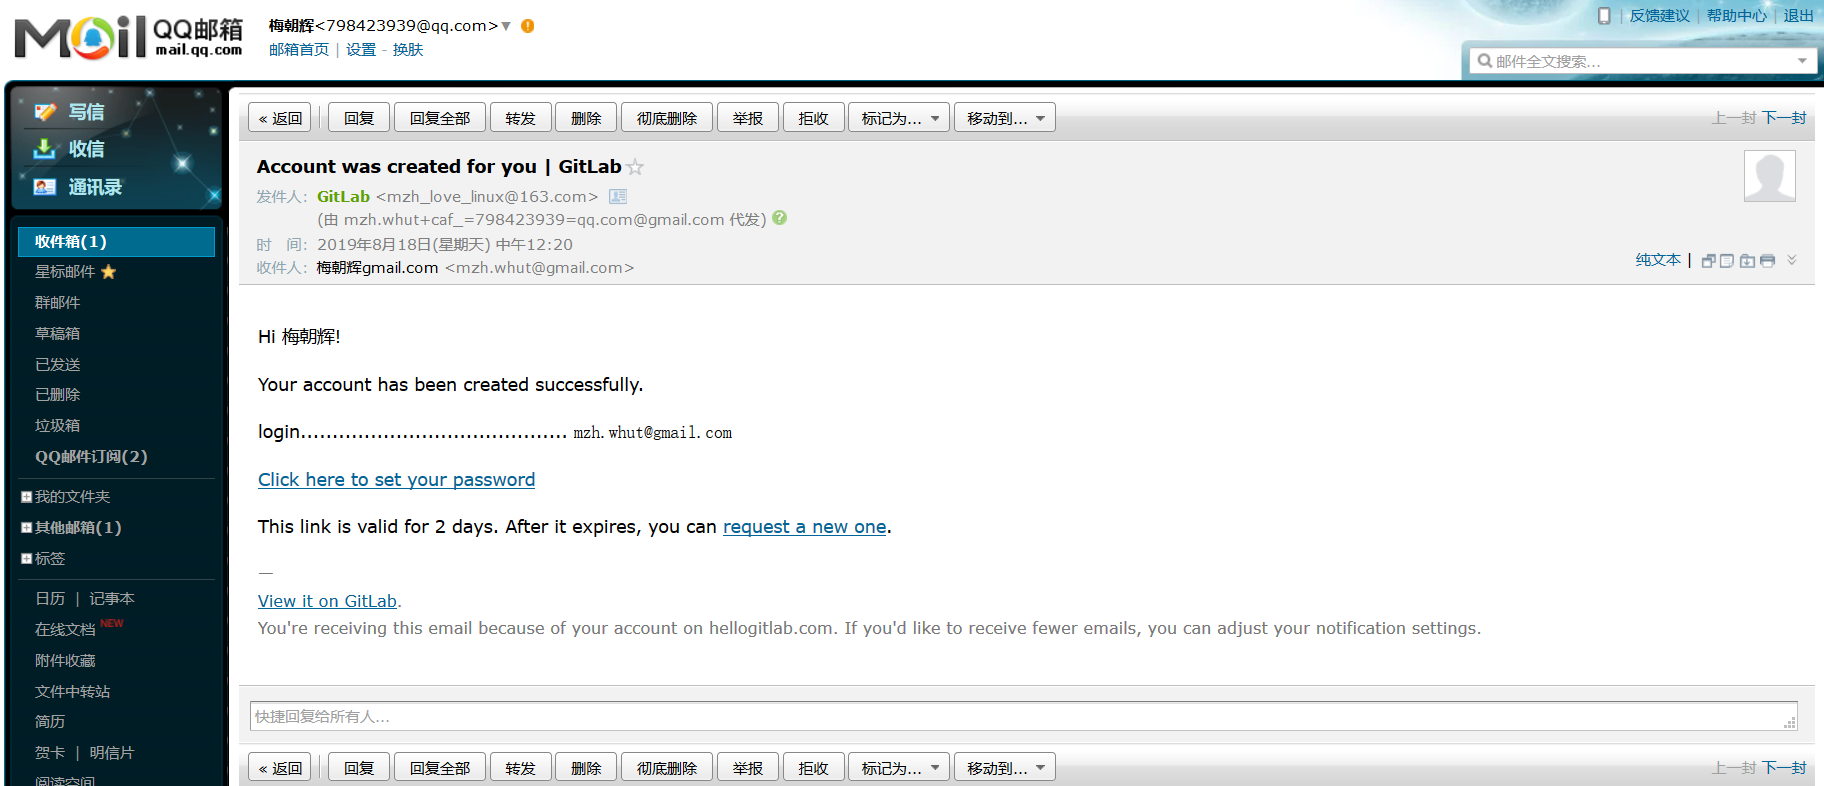 gitlab_domain_account_was_created_for_you_email.png